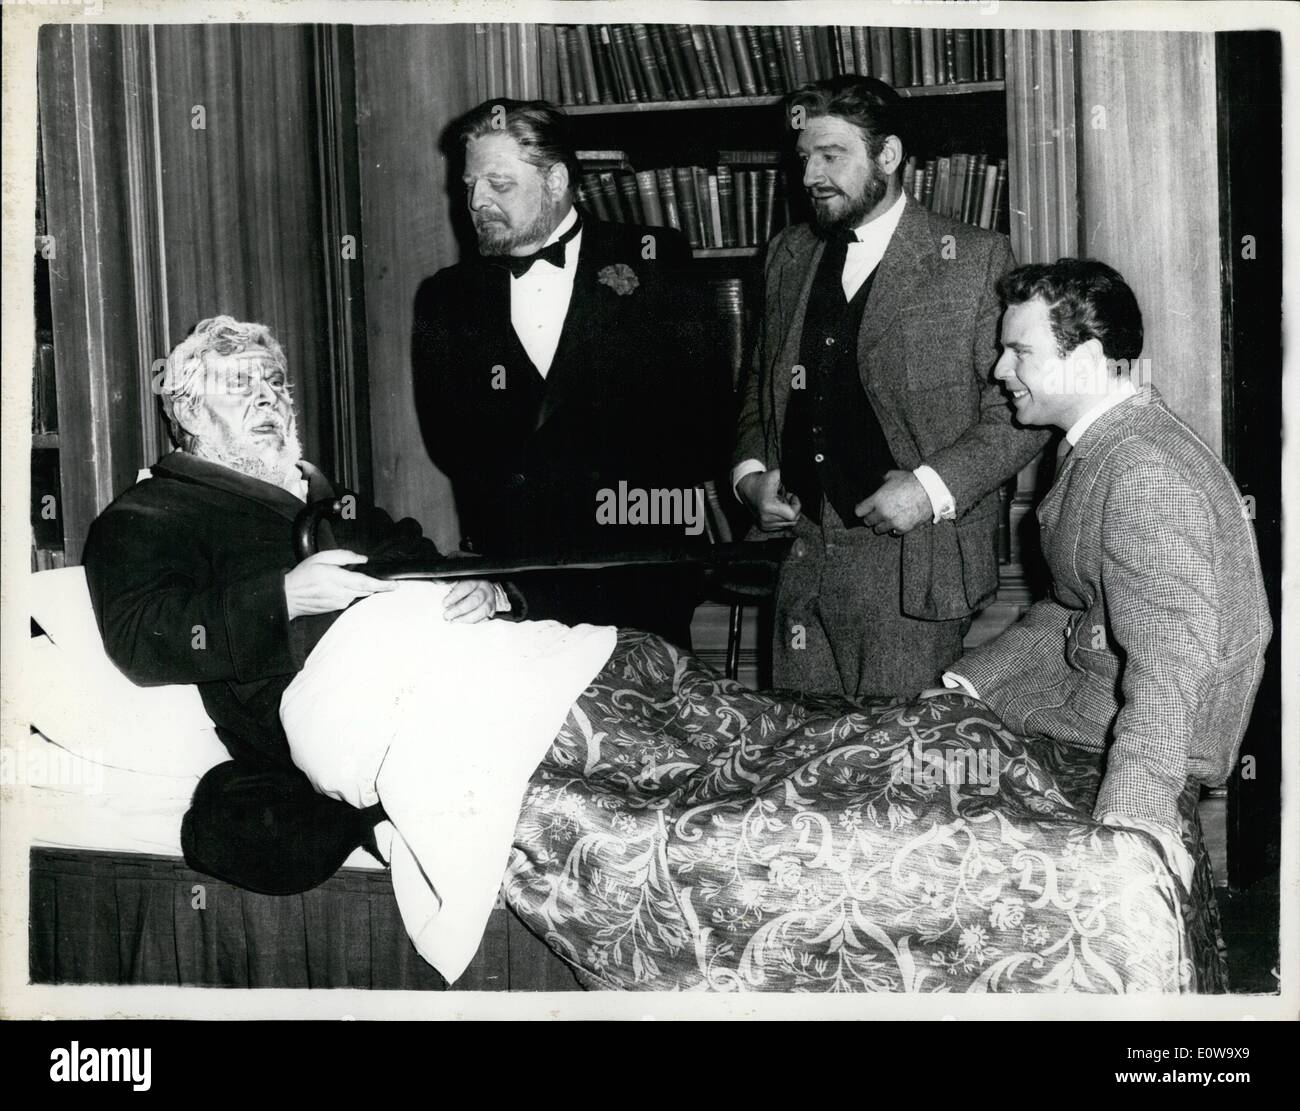 Apr. 04, 1962 - PETER USTINOV'S NEW PLAY. PETER USTINOV'S new play, PHOTO FINISH, opens tomorrow bight at the Saville Theatre, London. PHOTO SHOWS: PETER USTINOV, as Sam, in bed: on the far side of it are three members of the cast who portray ''Sam'' at different ages, left to right: WENSLEY PITHEY, 60, ROBERT BROWN, 40, and EDWARD HARDWICKE, 20. Stock Photo